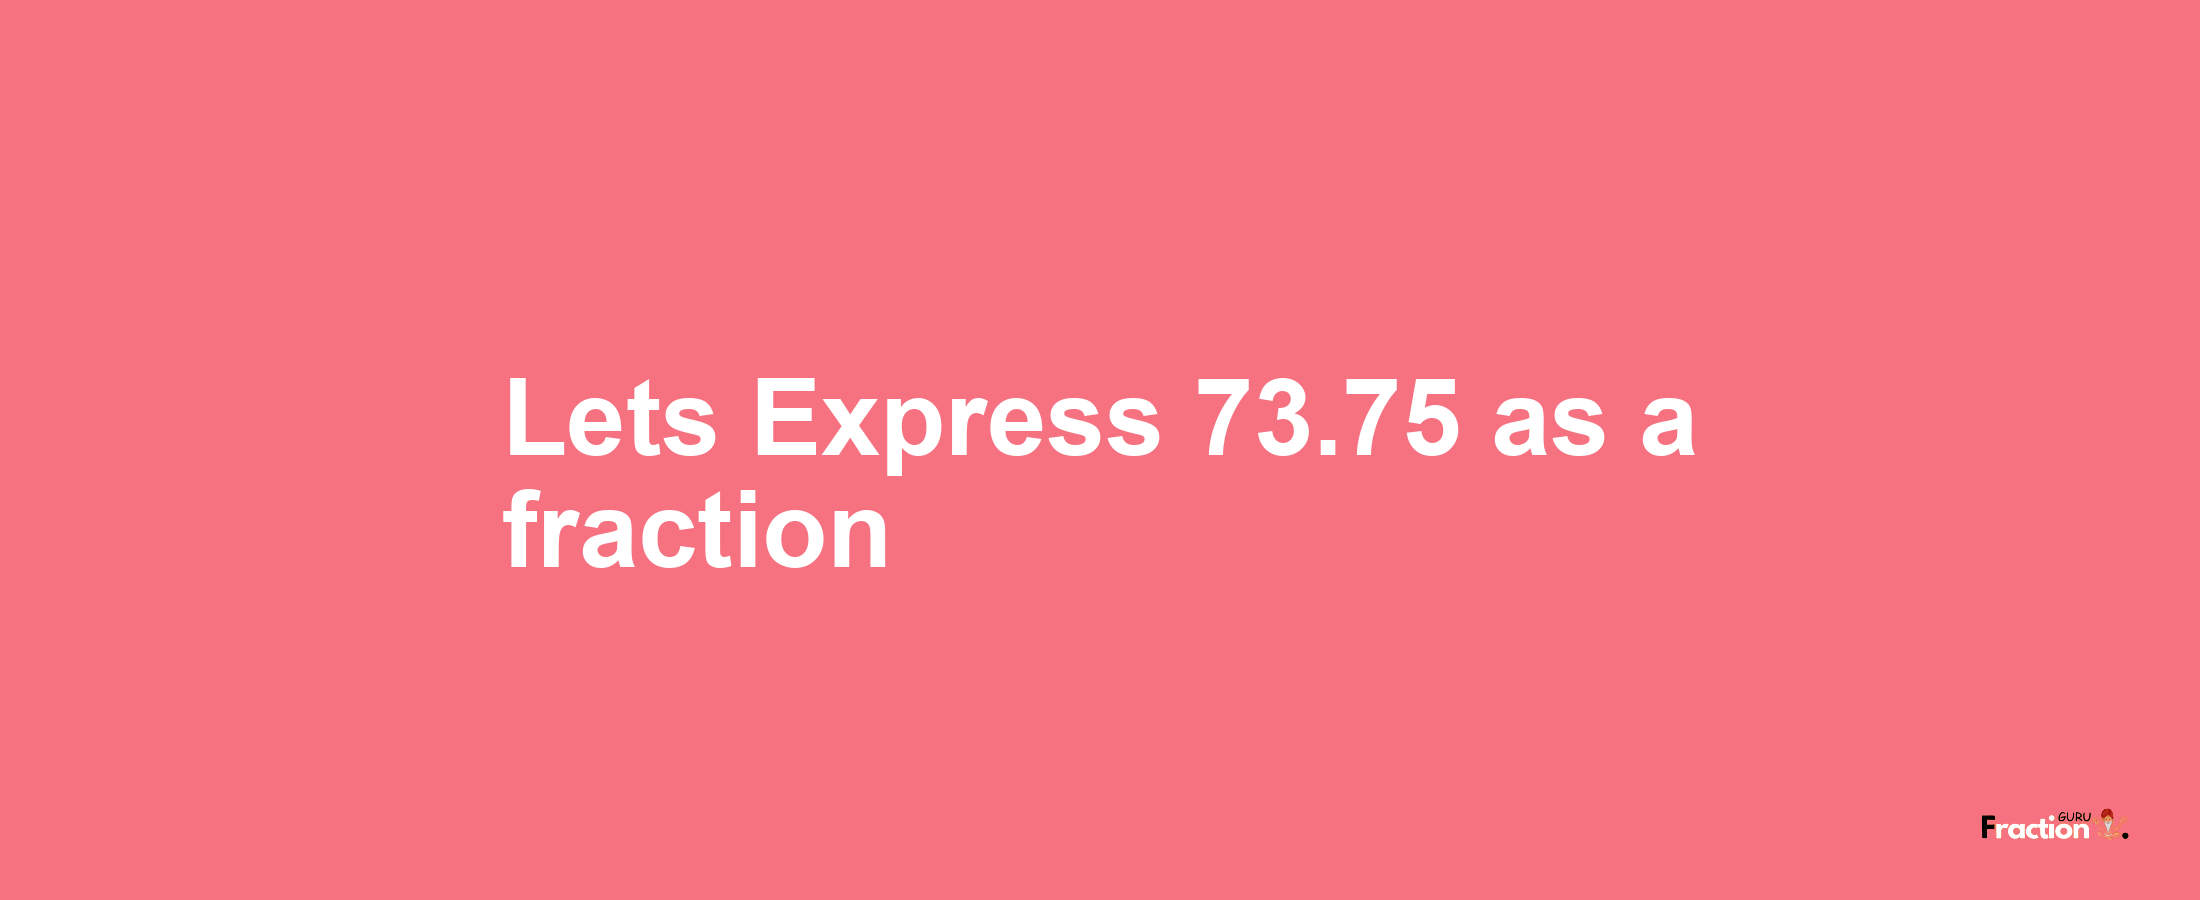 Lets Express 73.75 as afraction